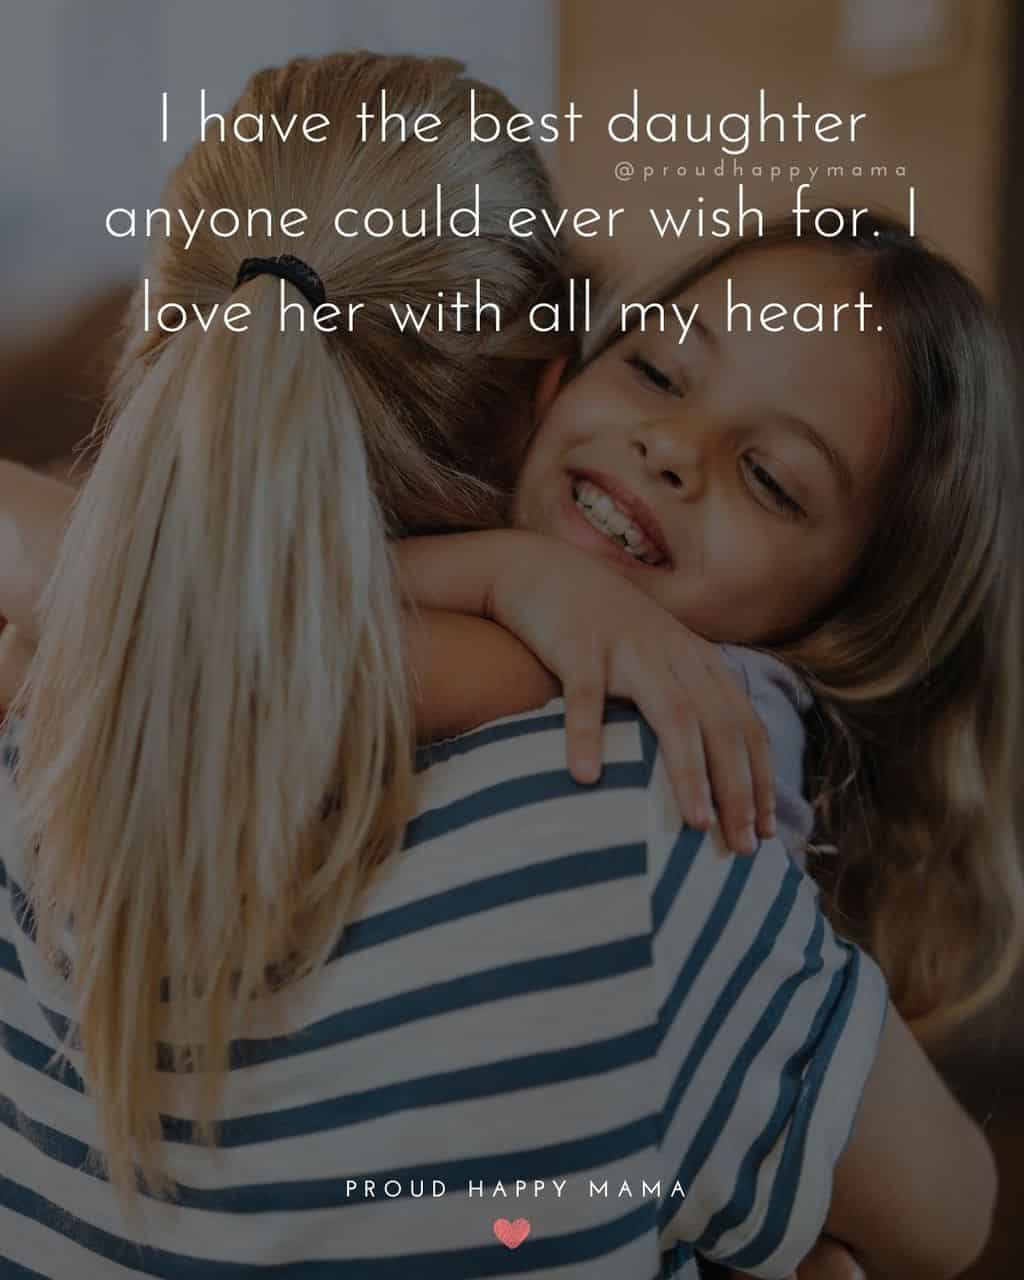 short daughter quotes - ‘I have the best daughter anyone could ever wish for. I love her with all my heart.’